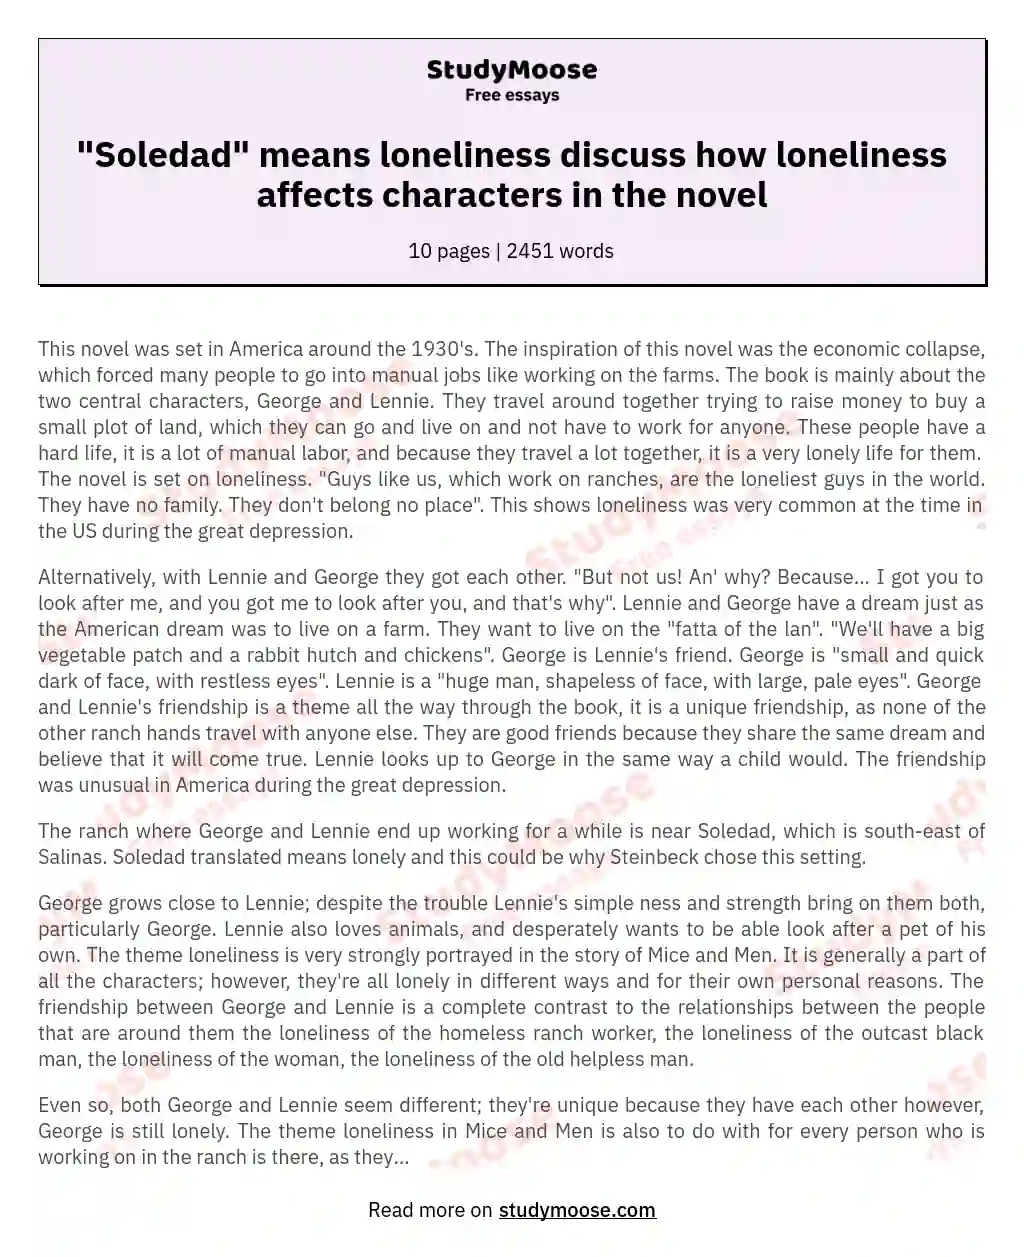 "Soledad" means loneliness discuss how loneliness affects characters in the novel